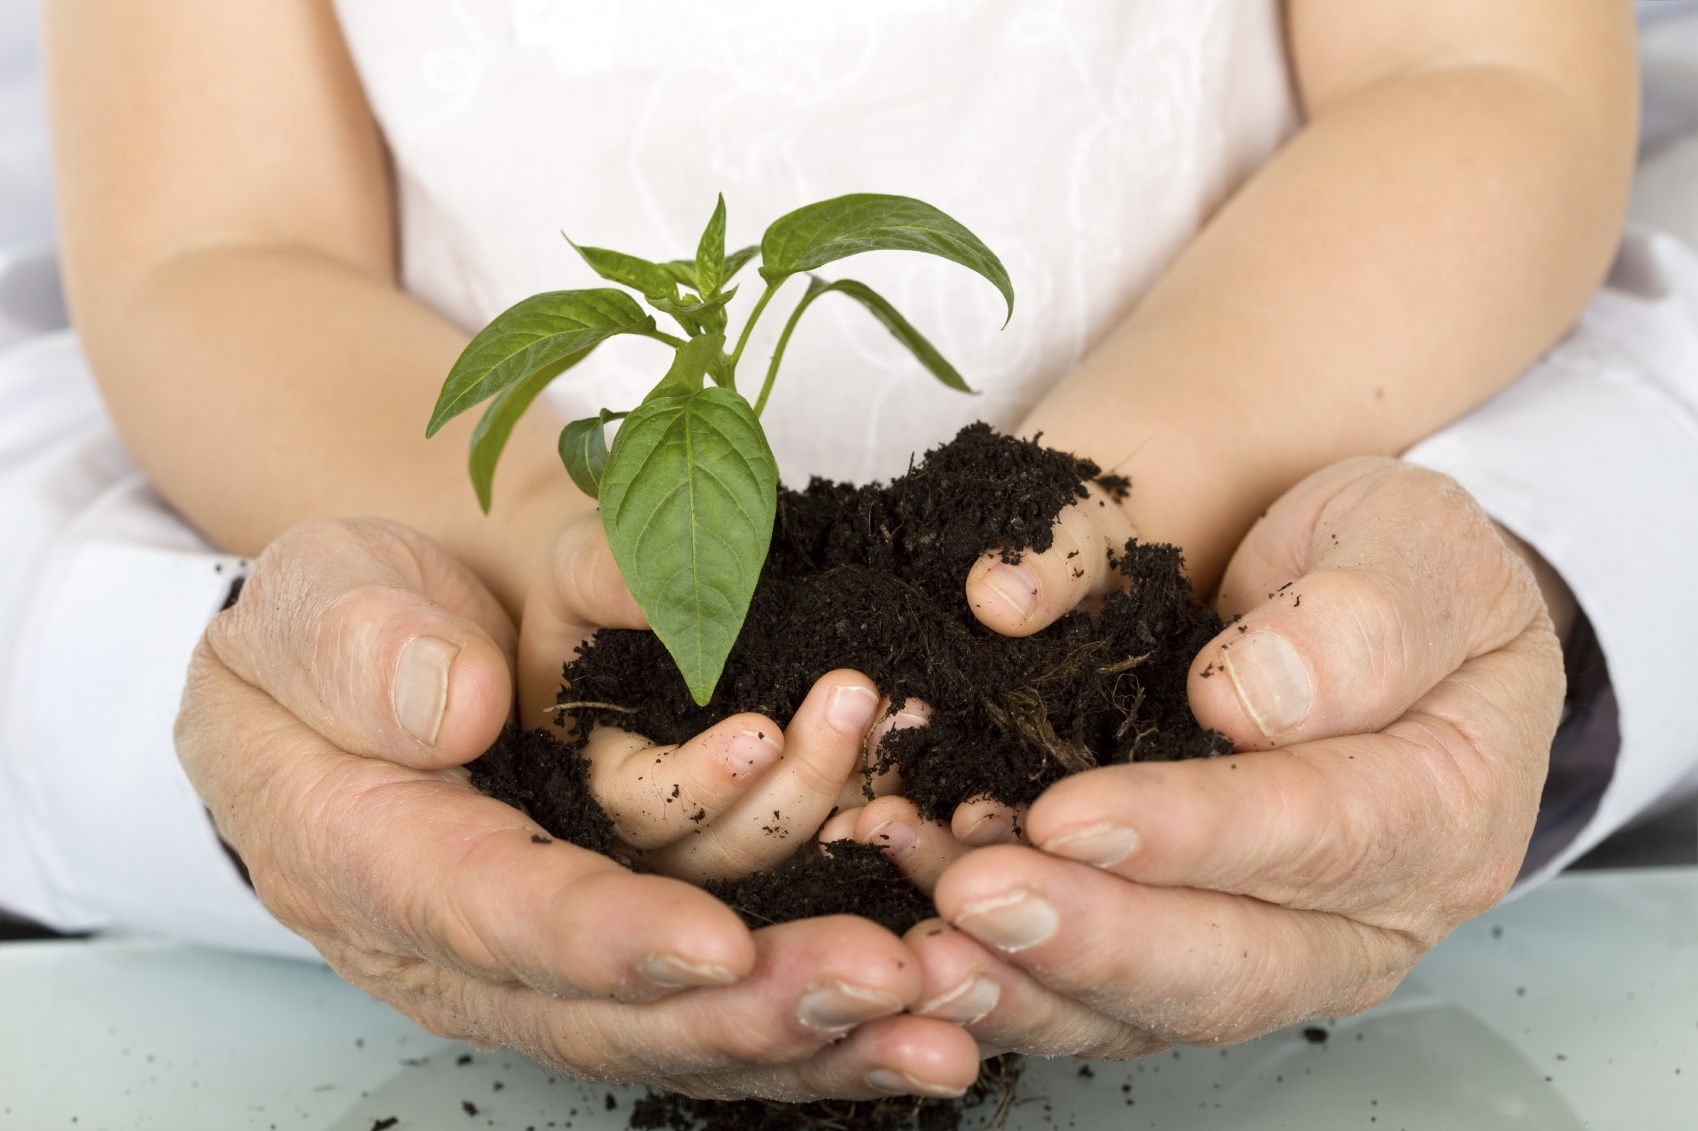 Child and adult hands holding new plant with soil